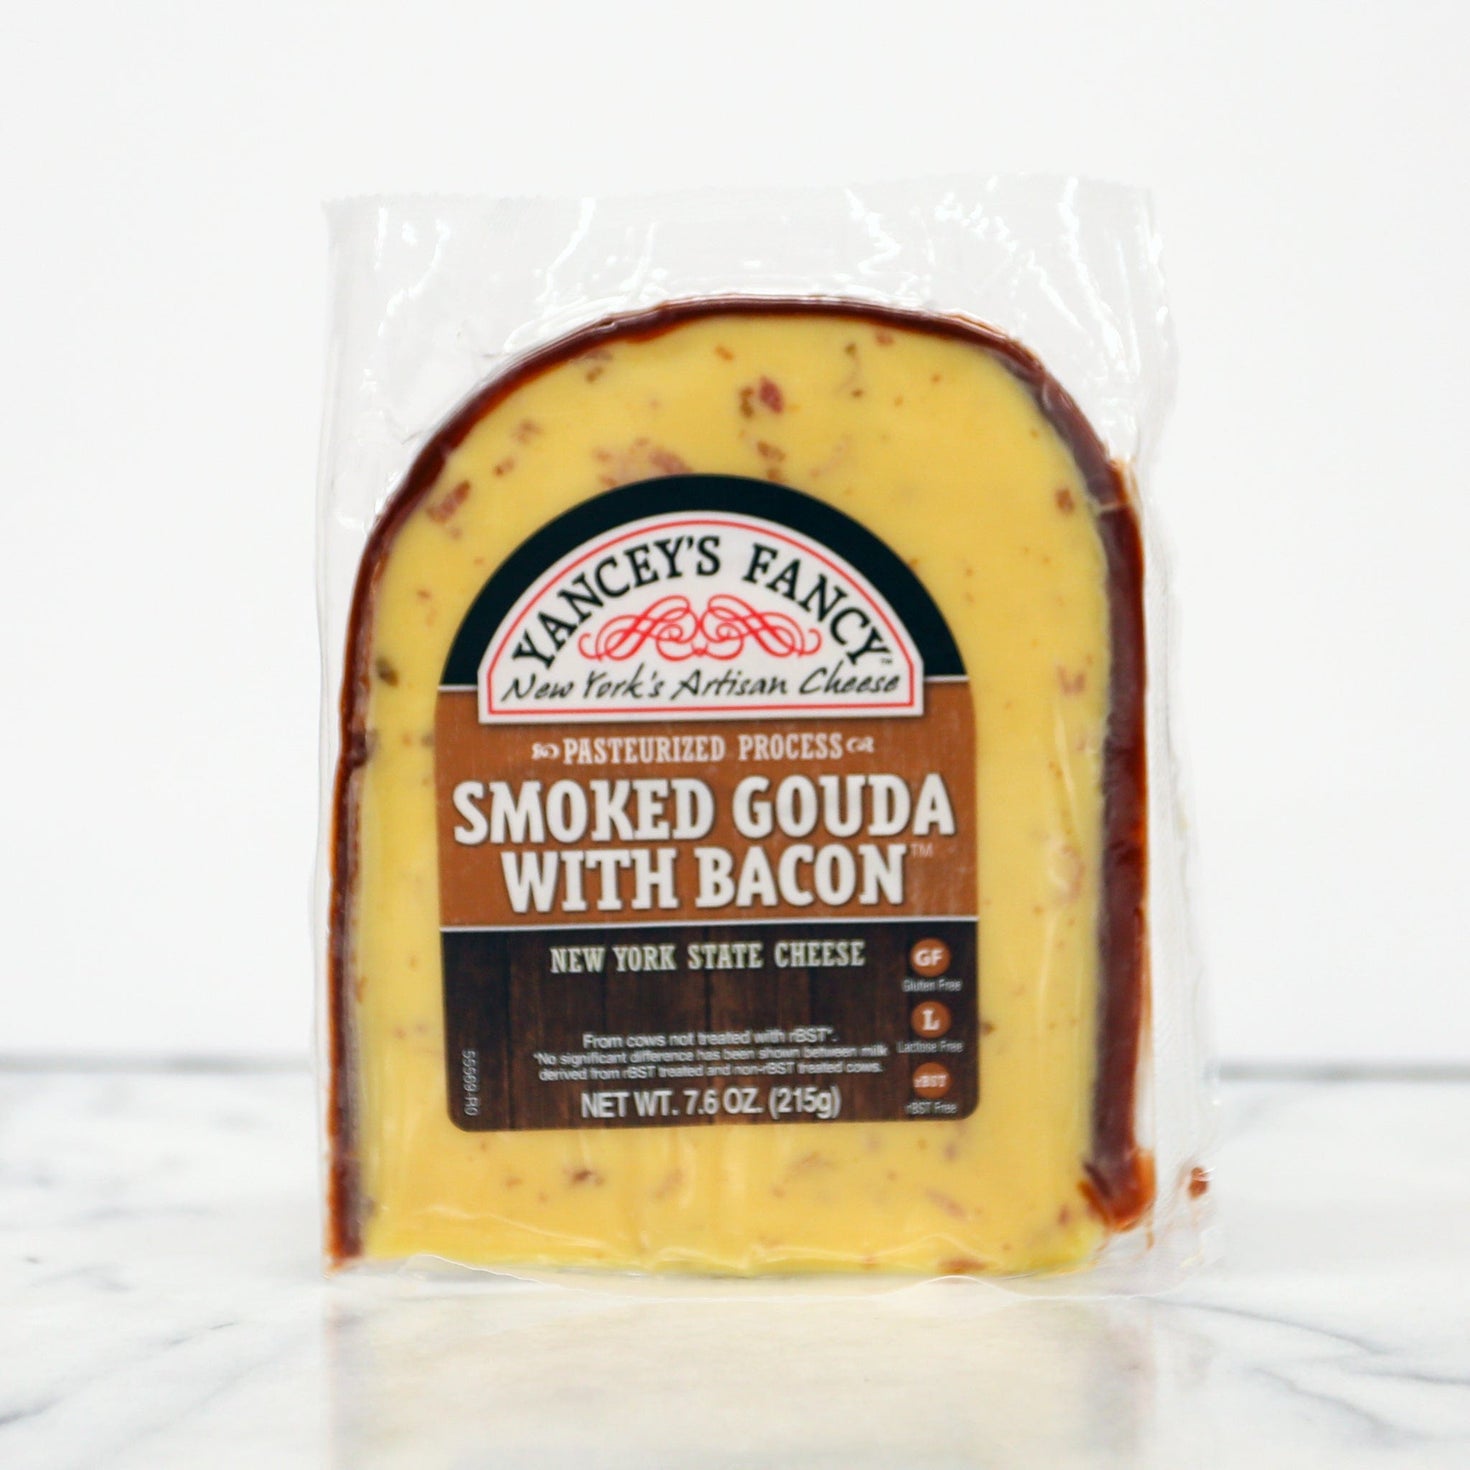 Yancey's Fancy Cheese - Smoked Gouda with Bacon 7.6oz